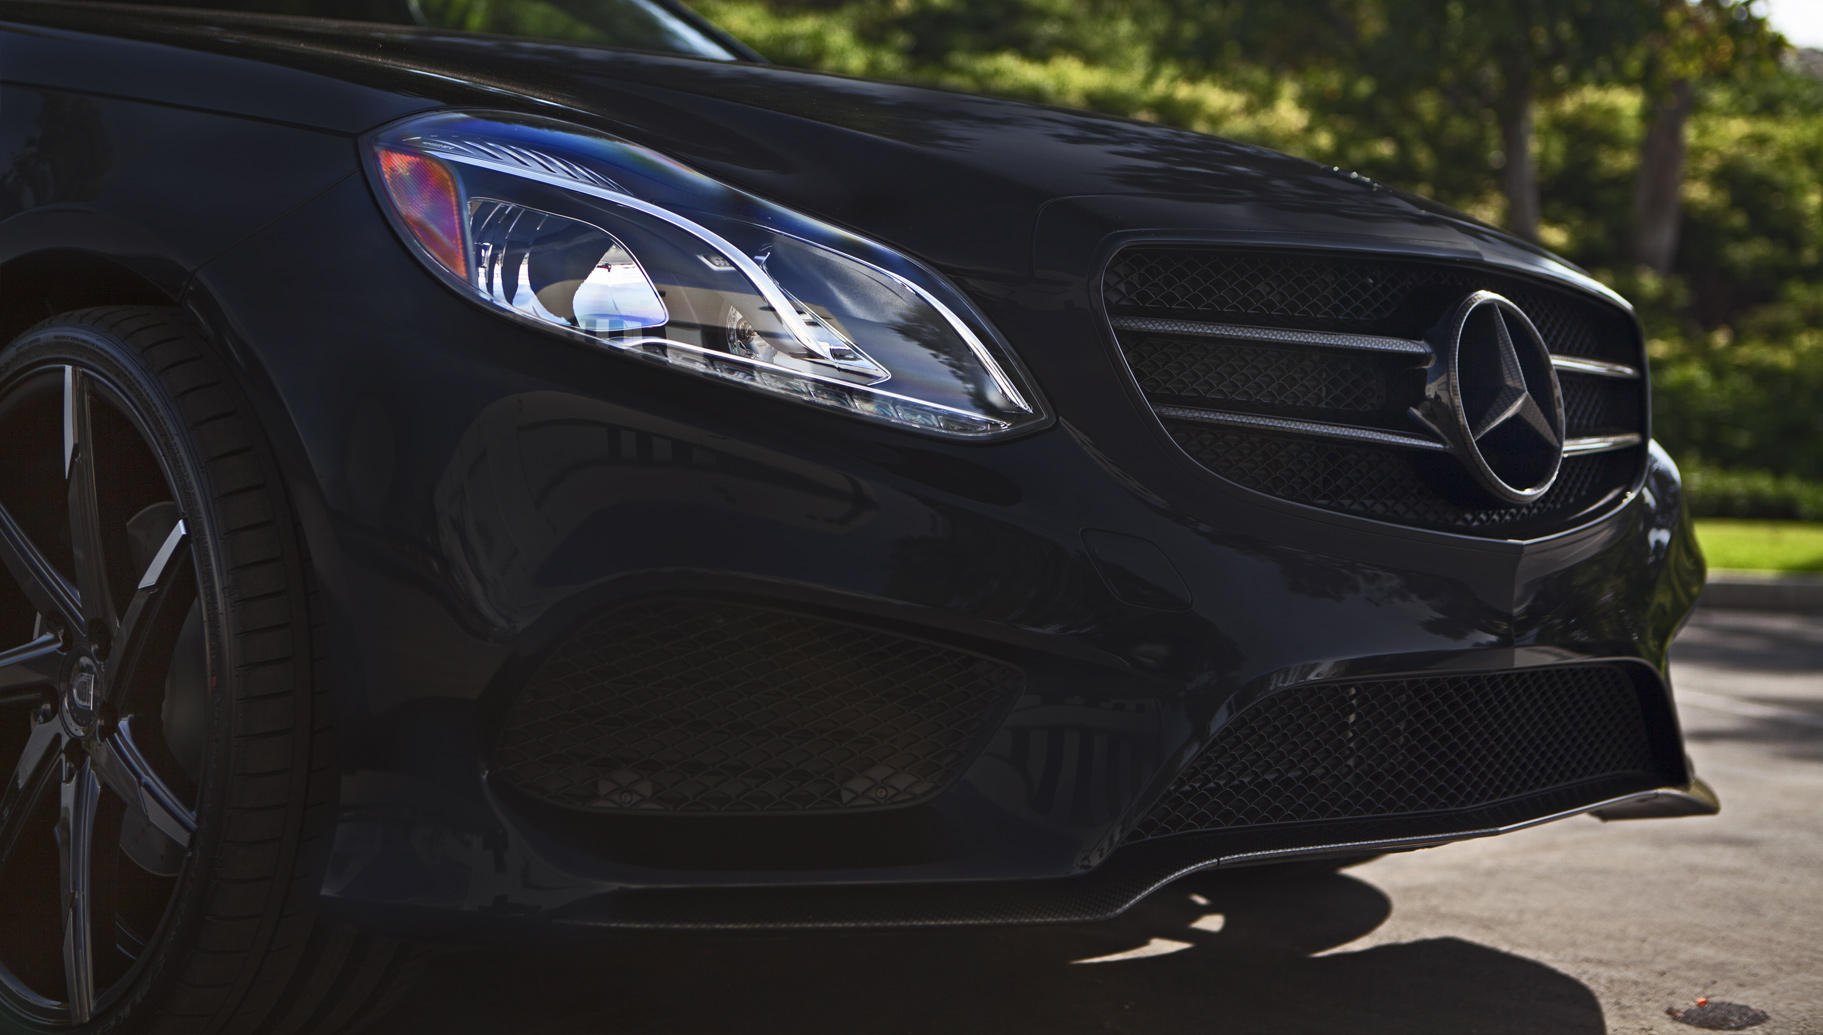 Mercedes E-Class with Blacked Out Custom Grille - Photo by Lexani